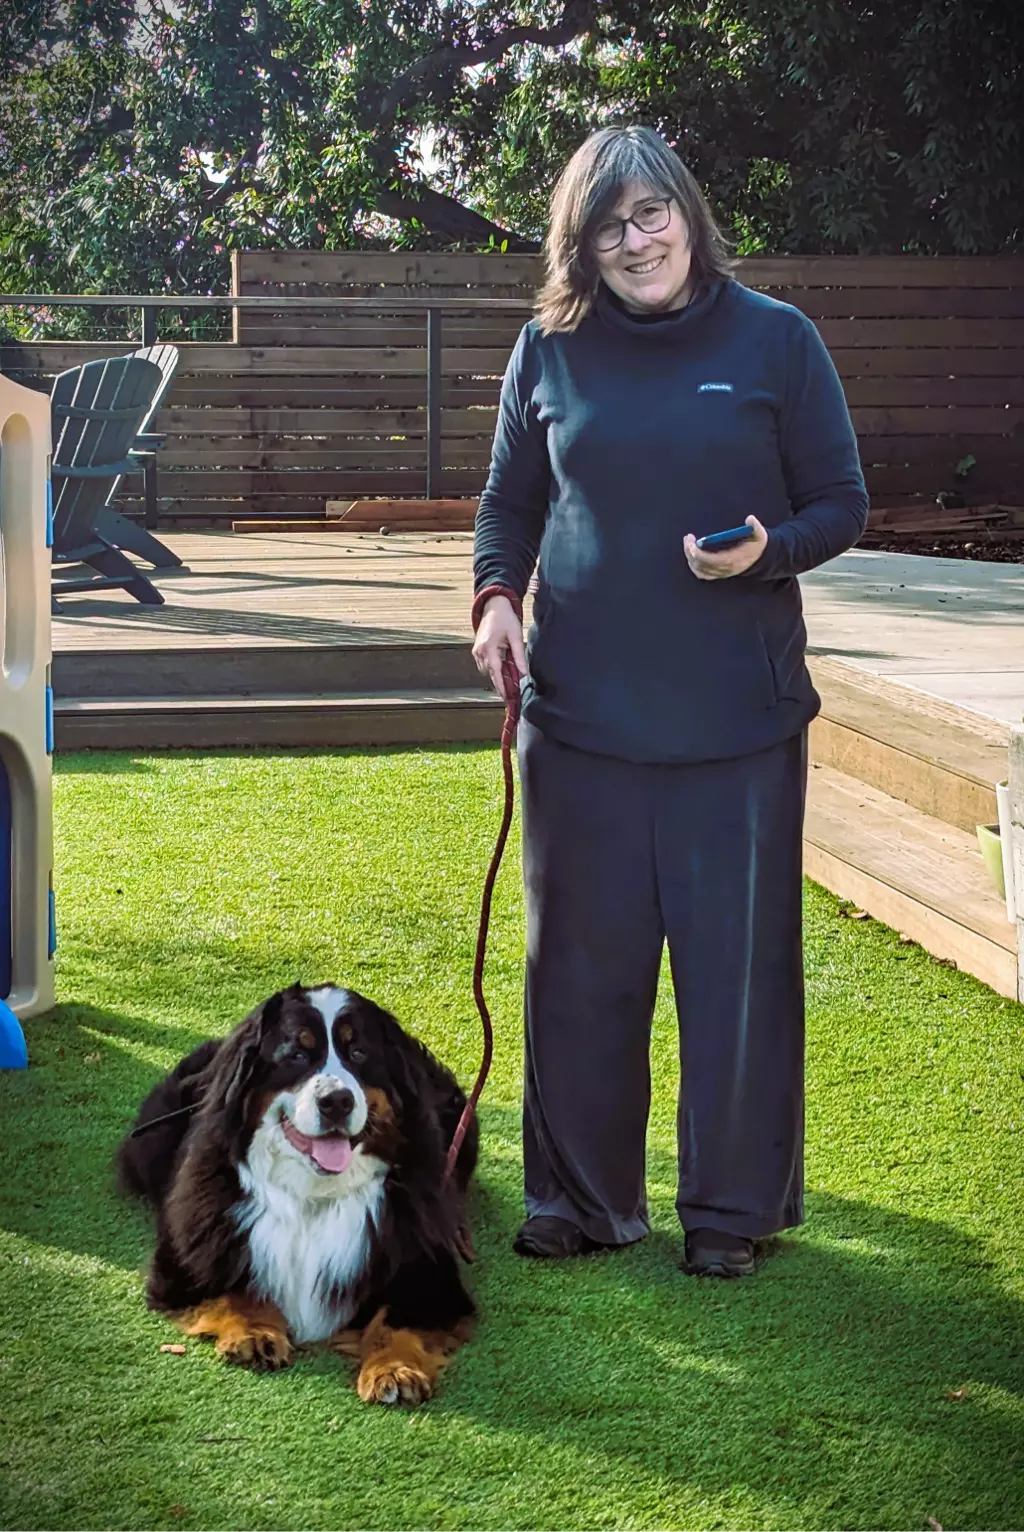 Woman with Bernese Mountain Dog on leash outdoors.